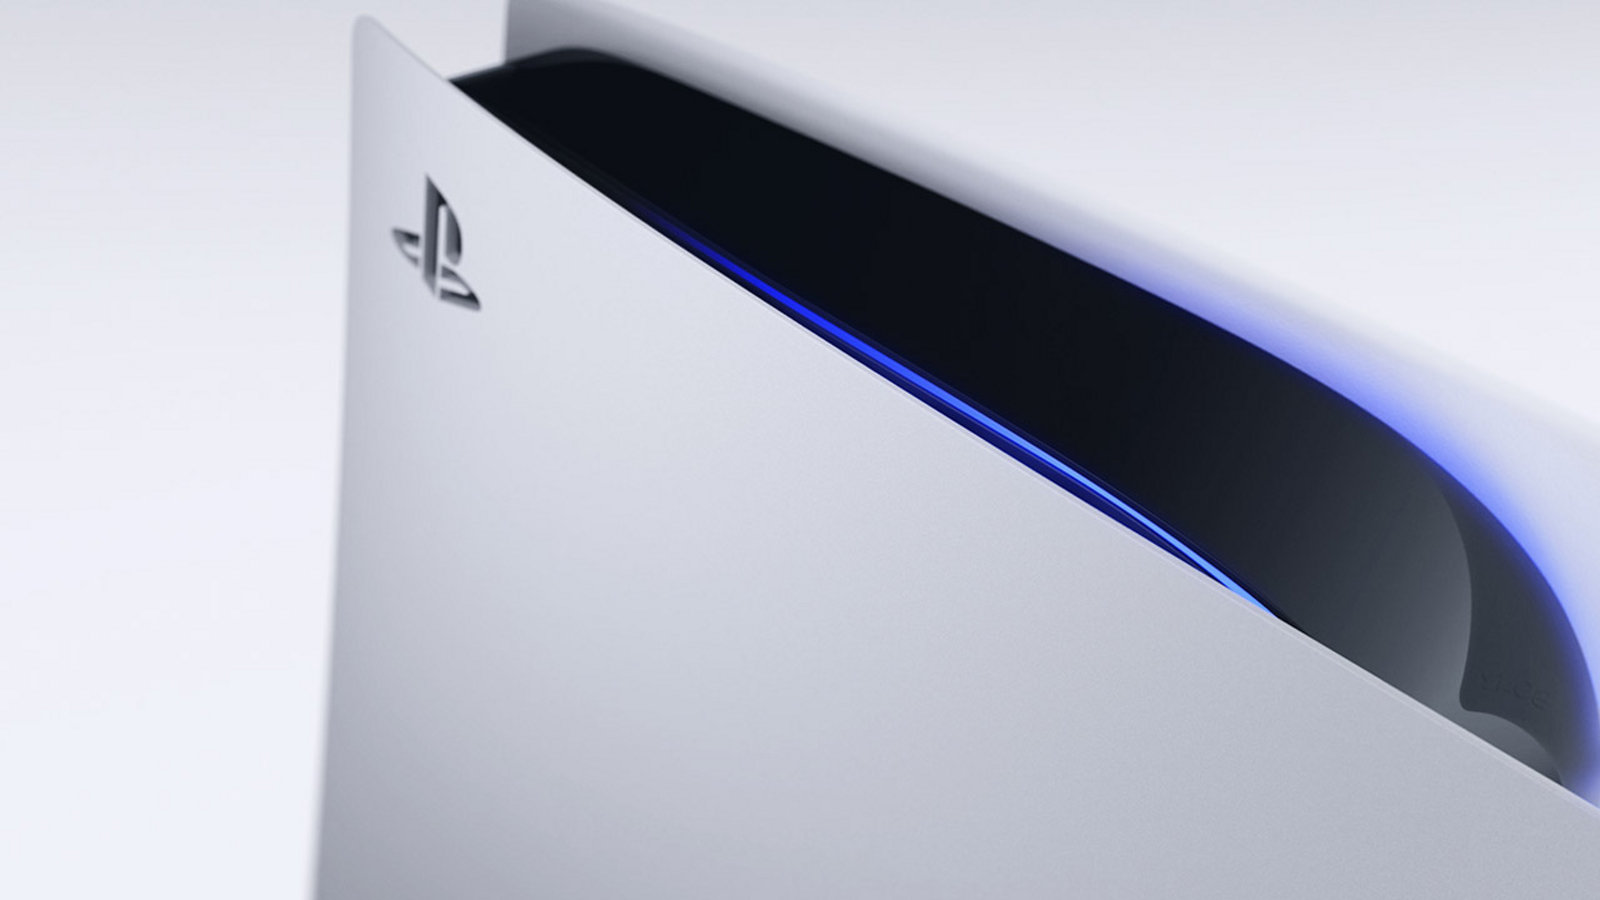 when the ps5 comes out how much will it be